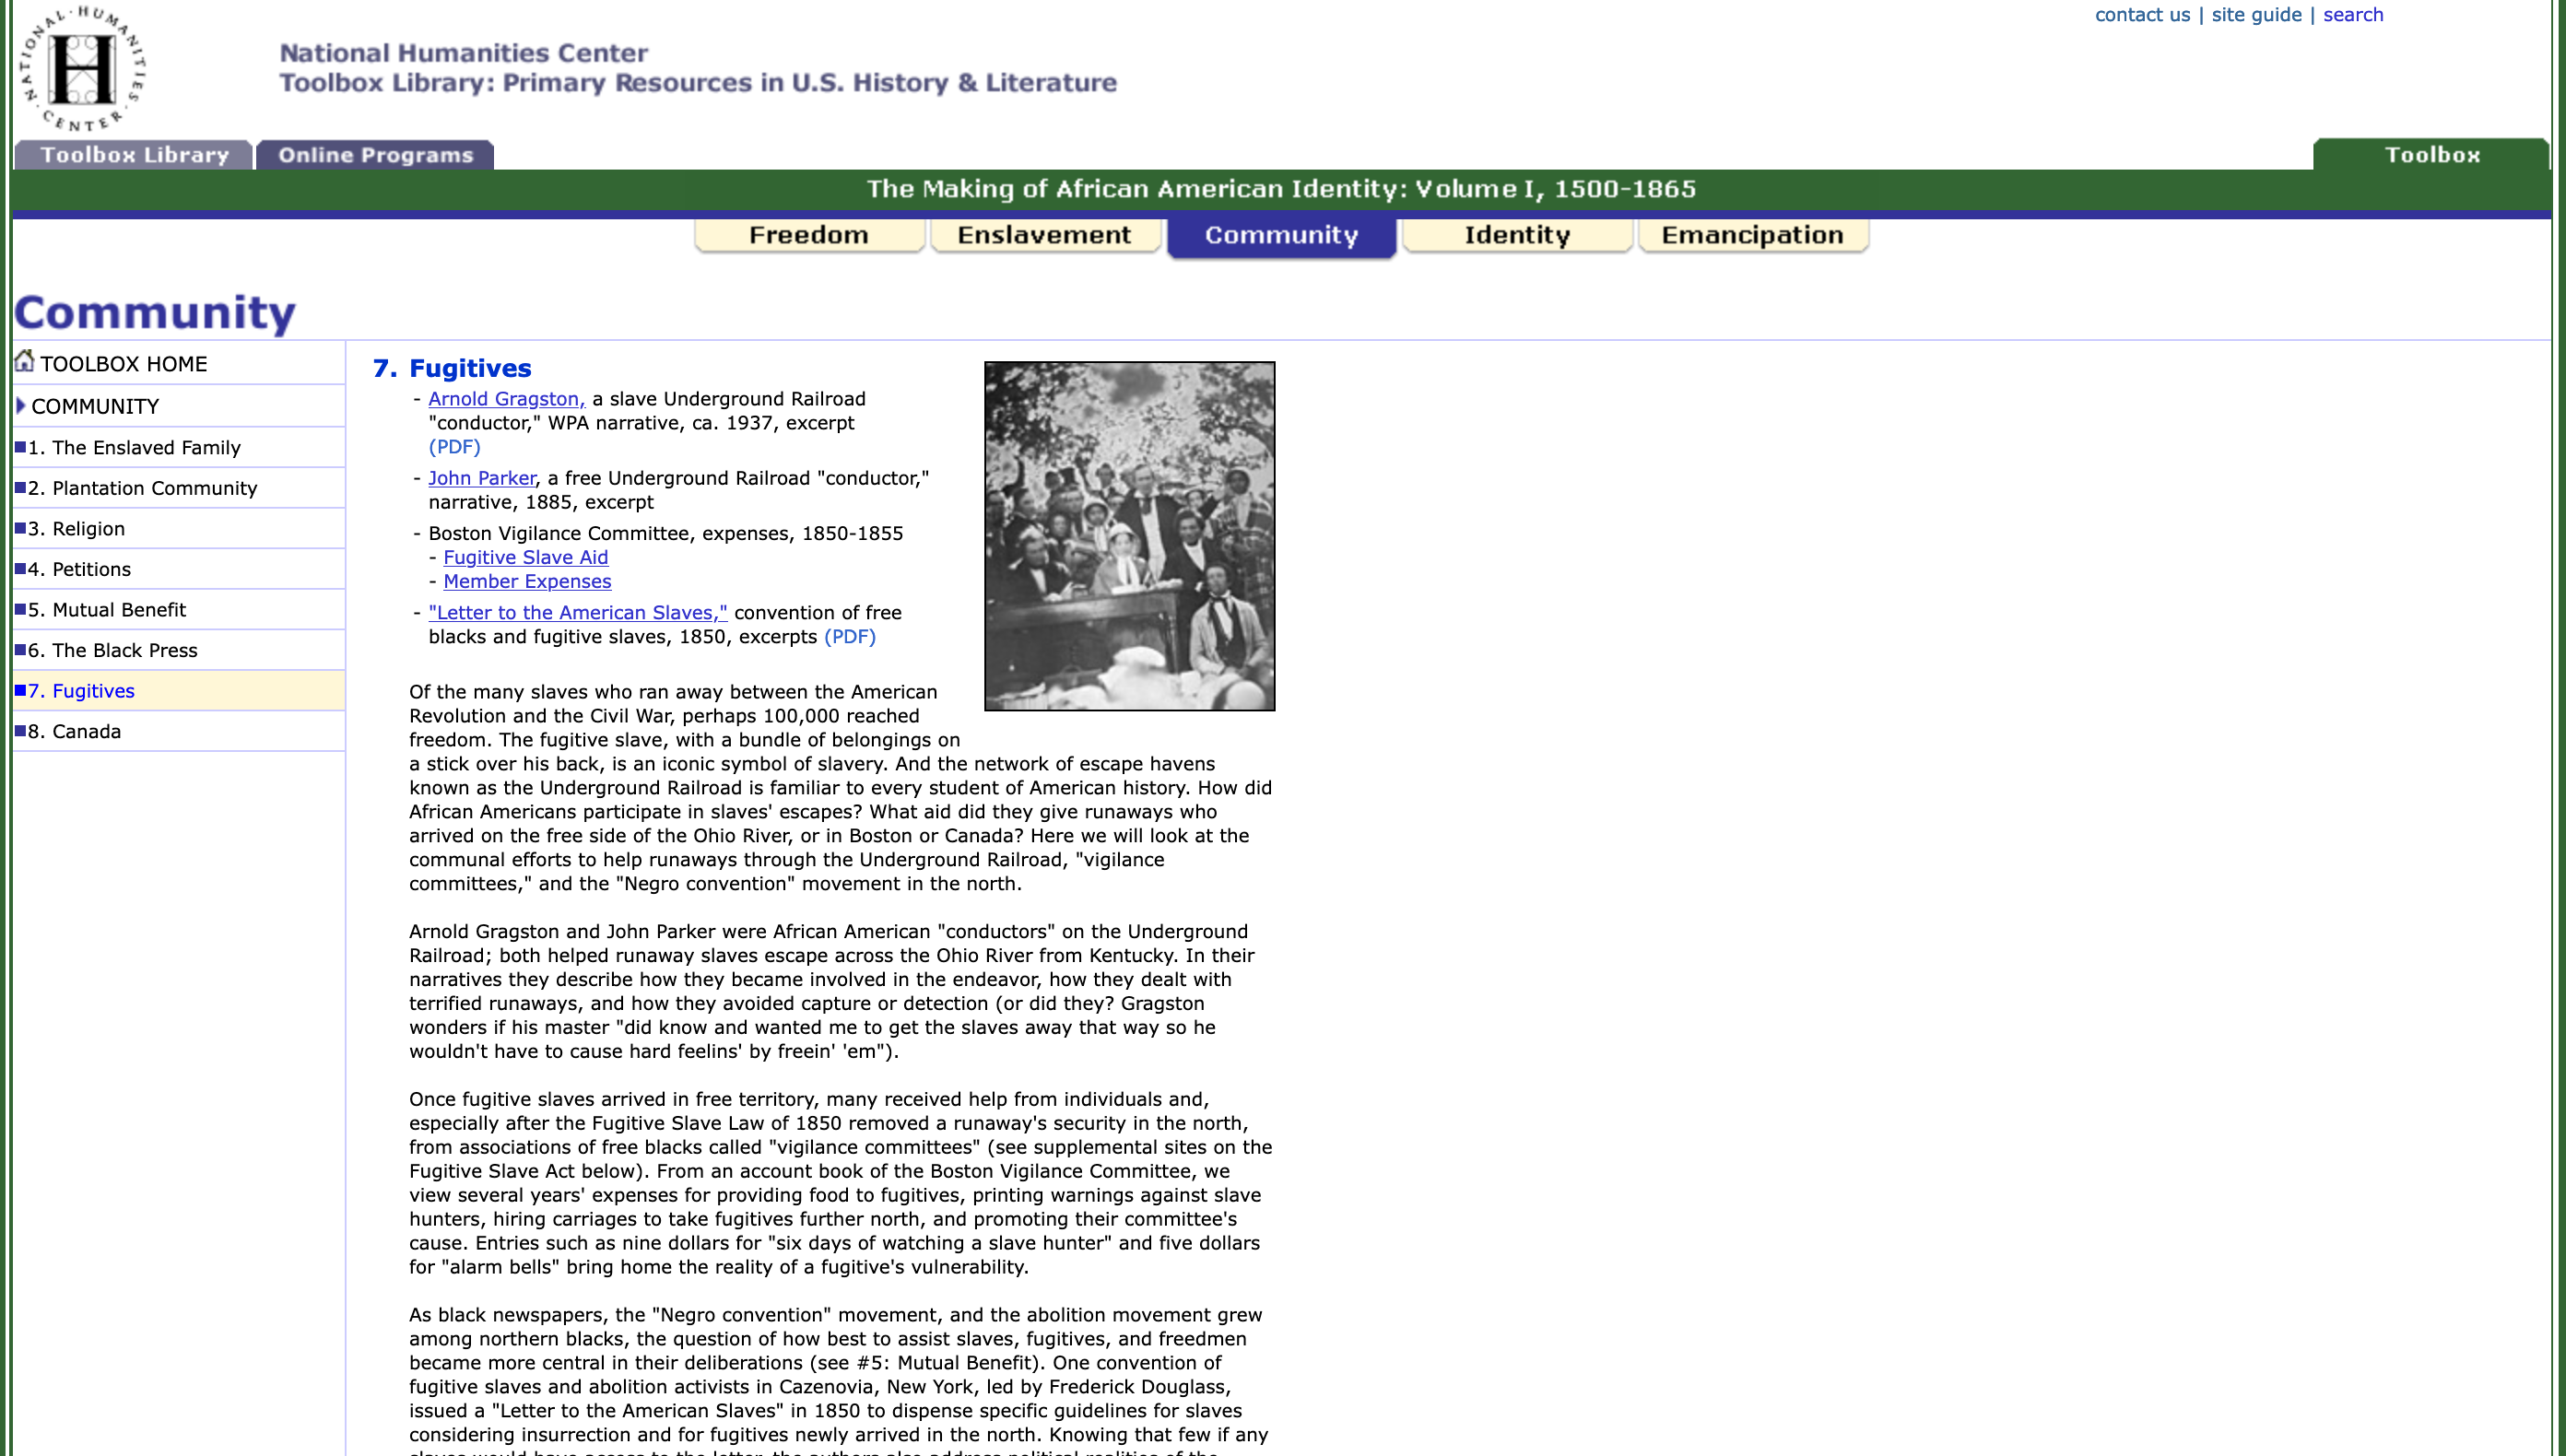 National Humanities Center: Primary Resources on US History & Literature